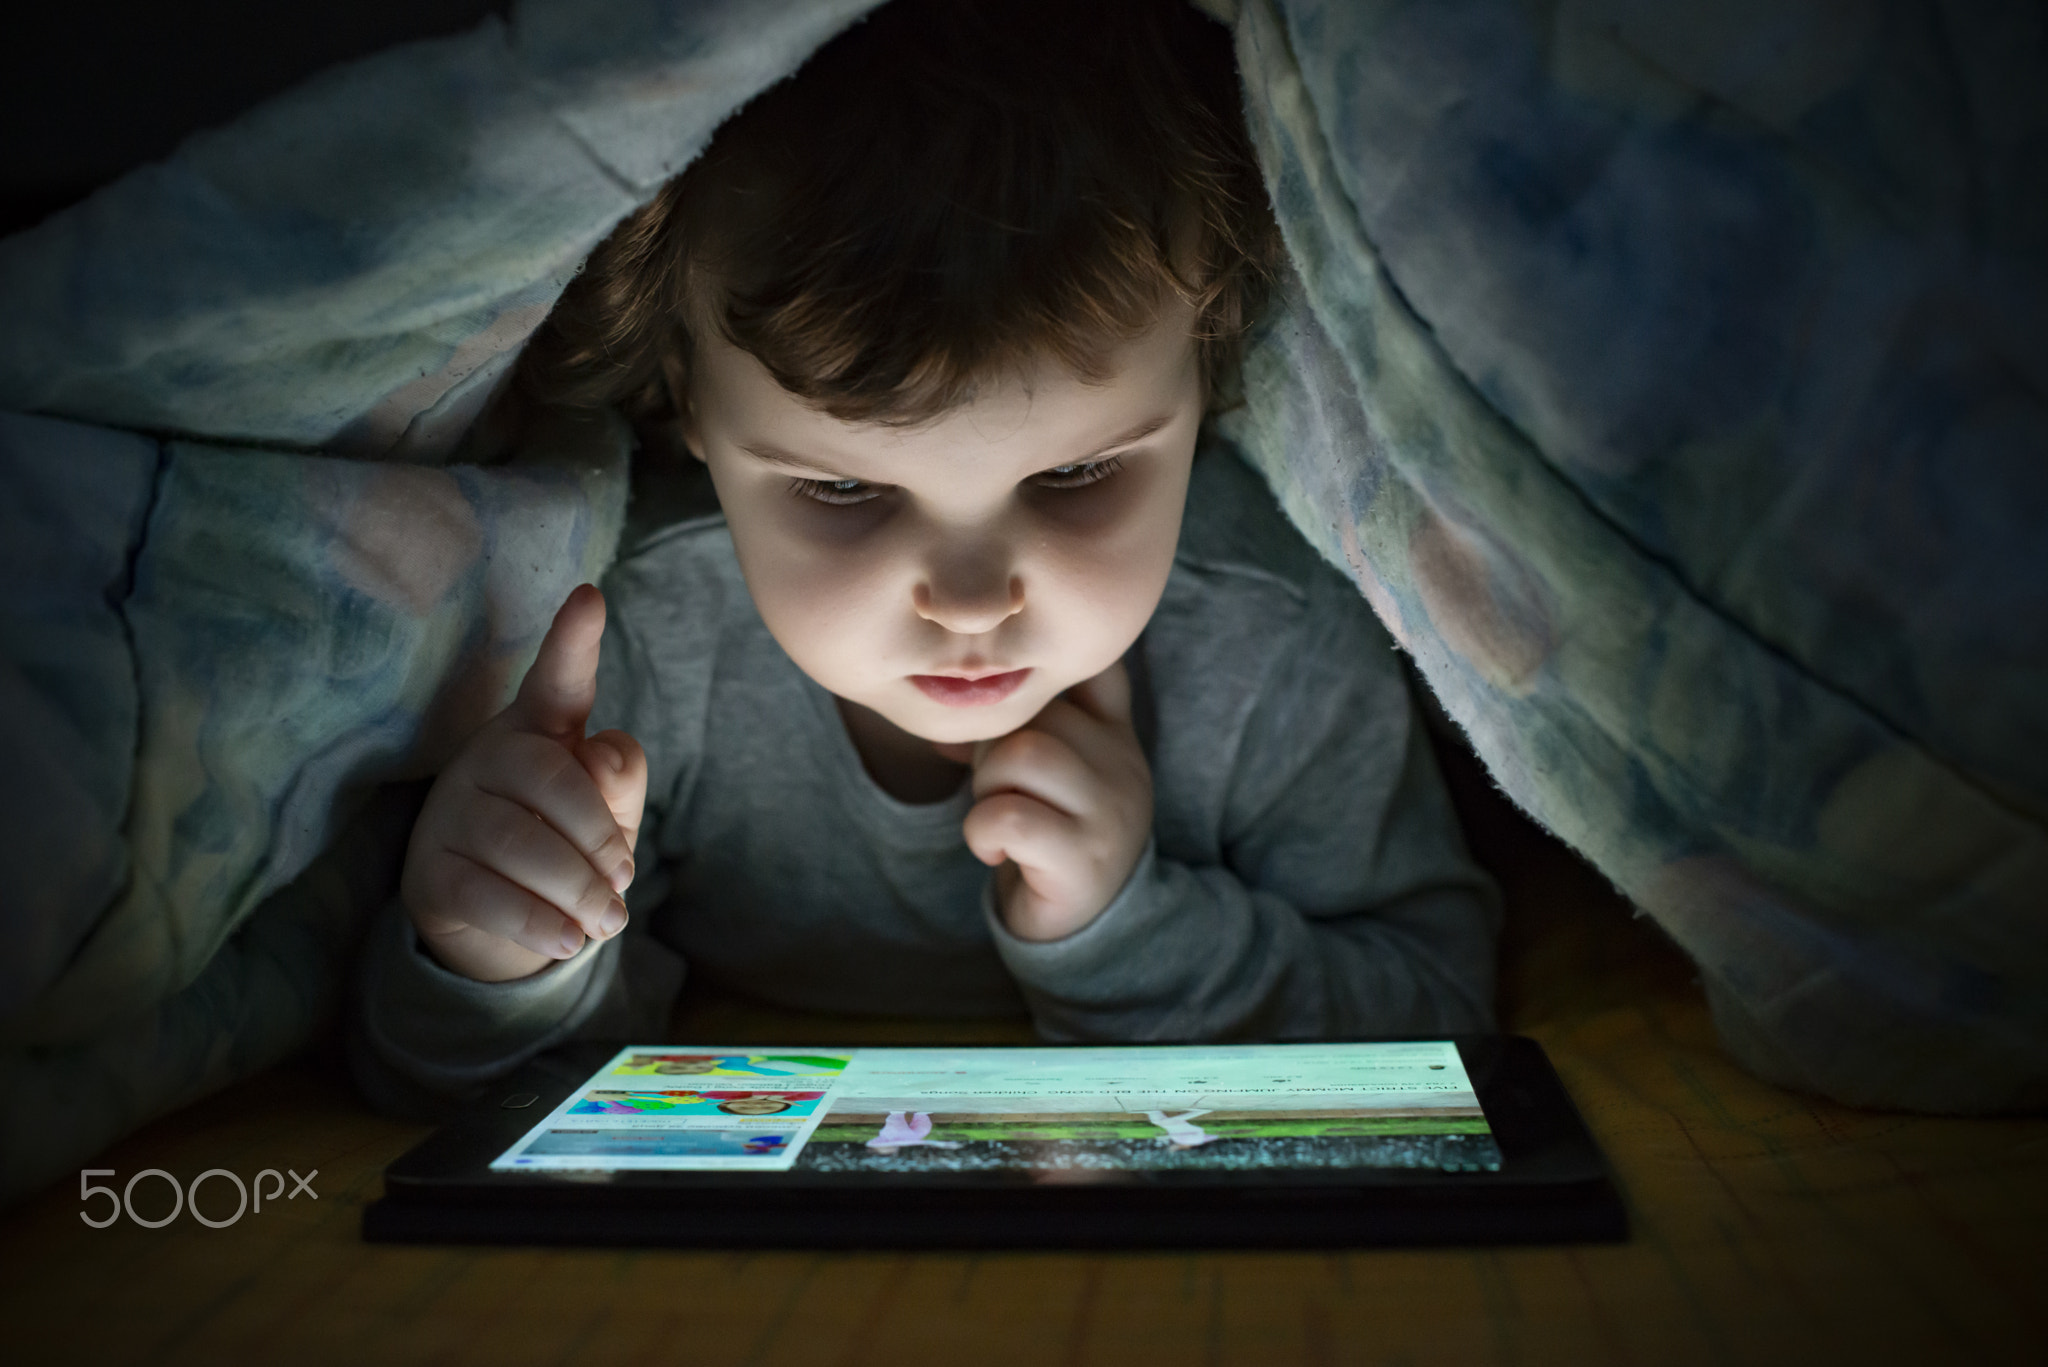 Little girl watching her tablet in the bed. Illuminated child fa